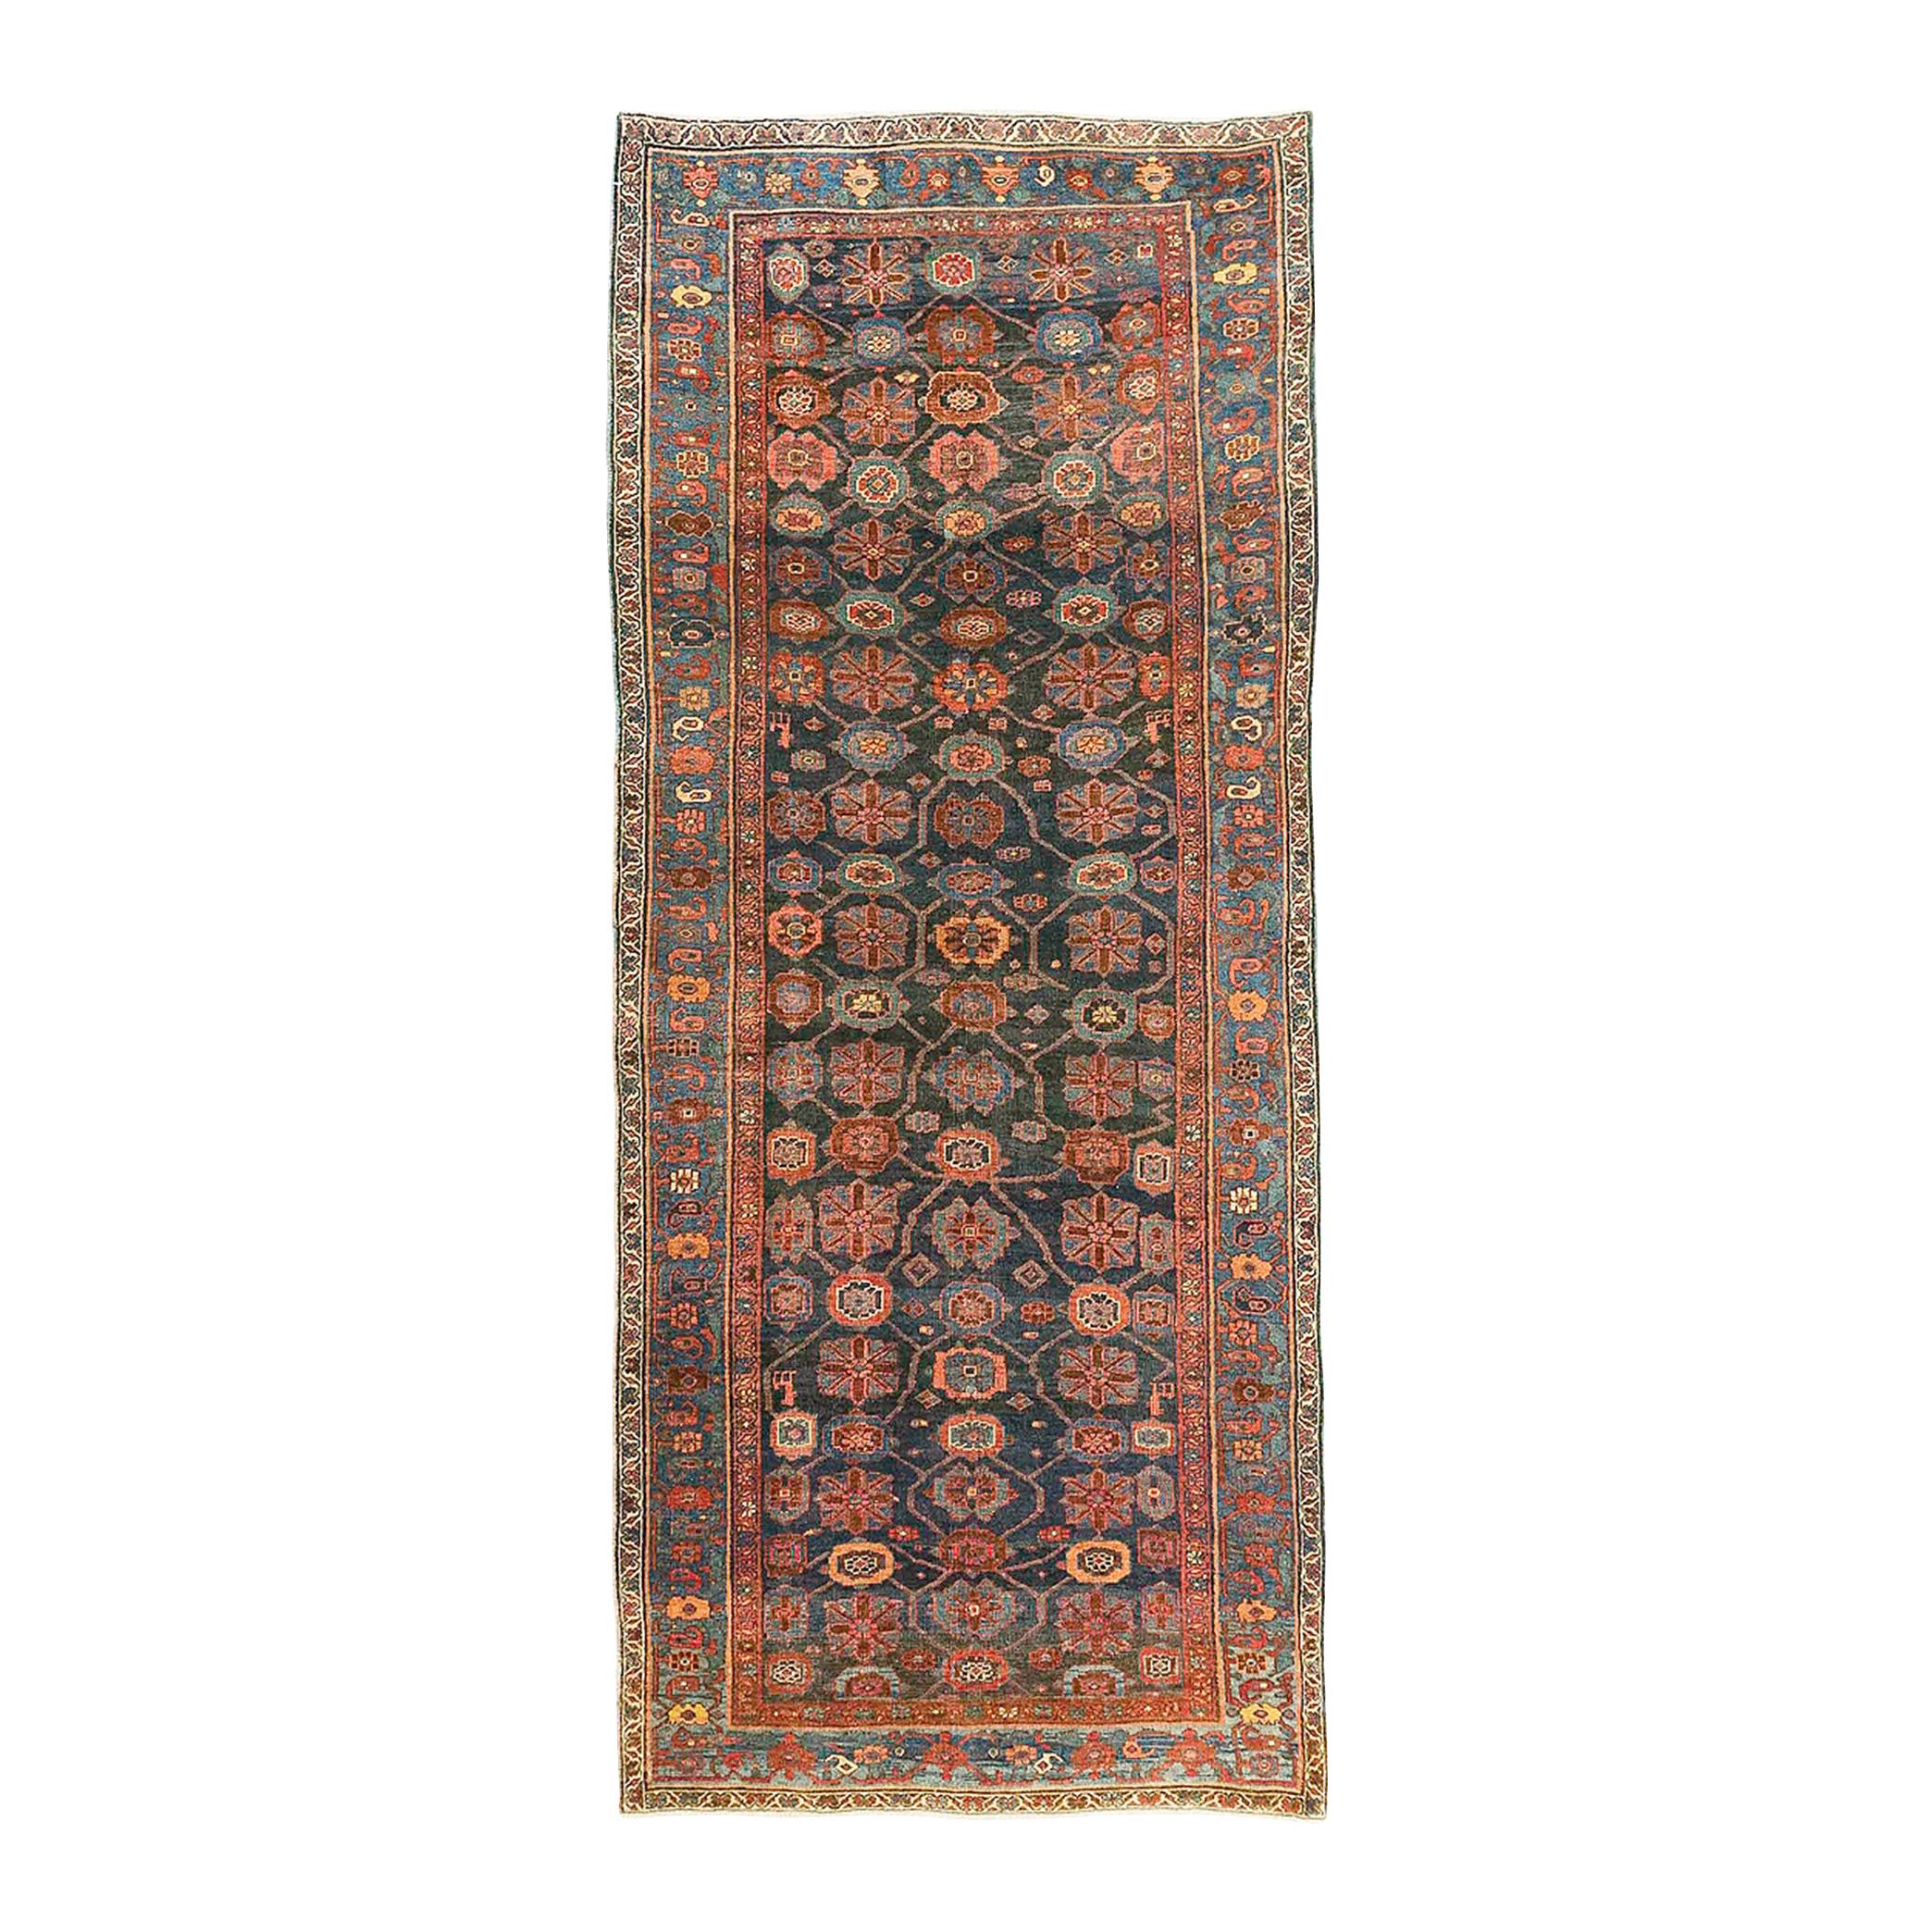 Antique Persian Bijar Rug with Blue and Red Floral Medallion on Black Field